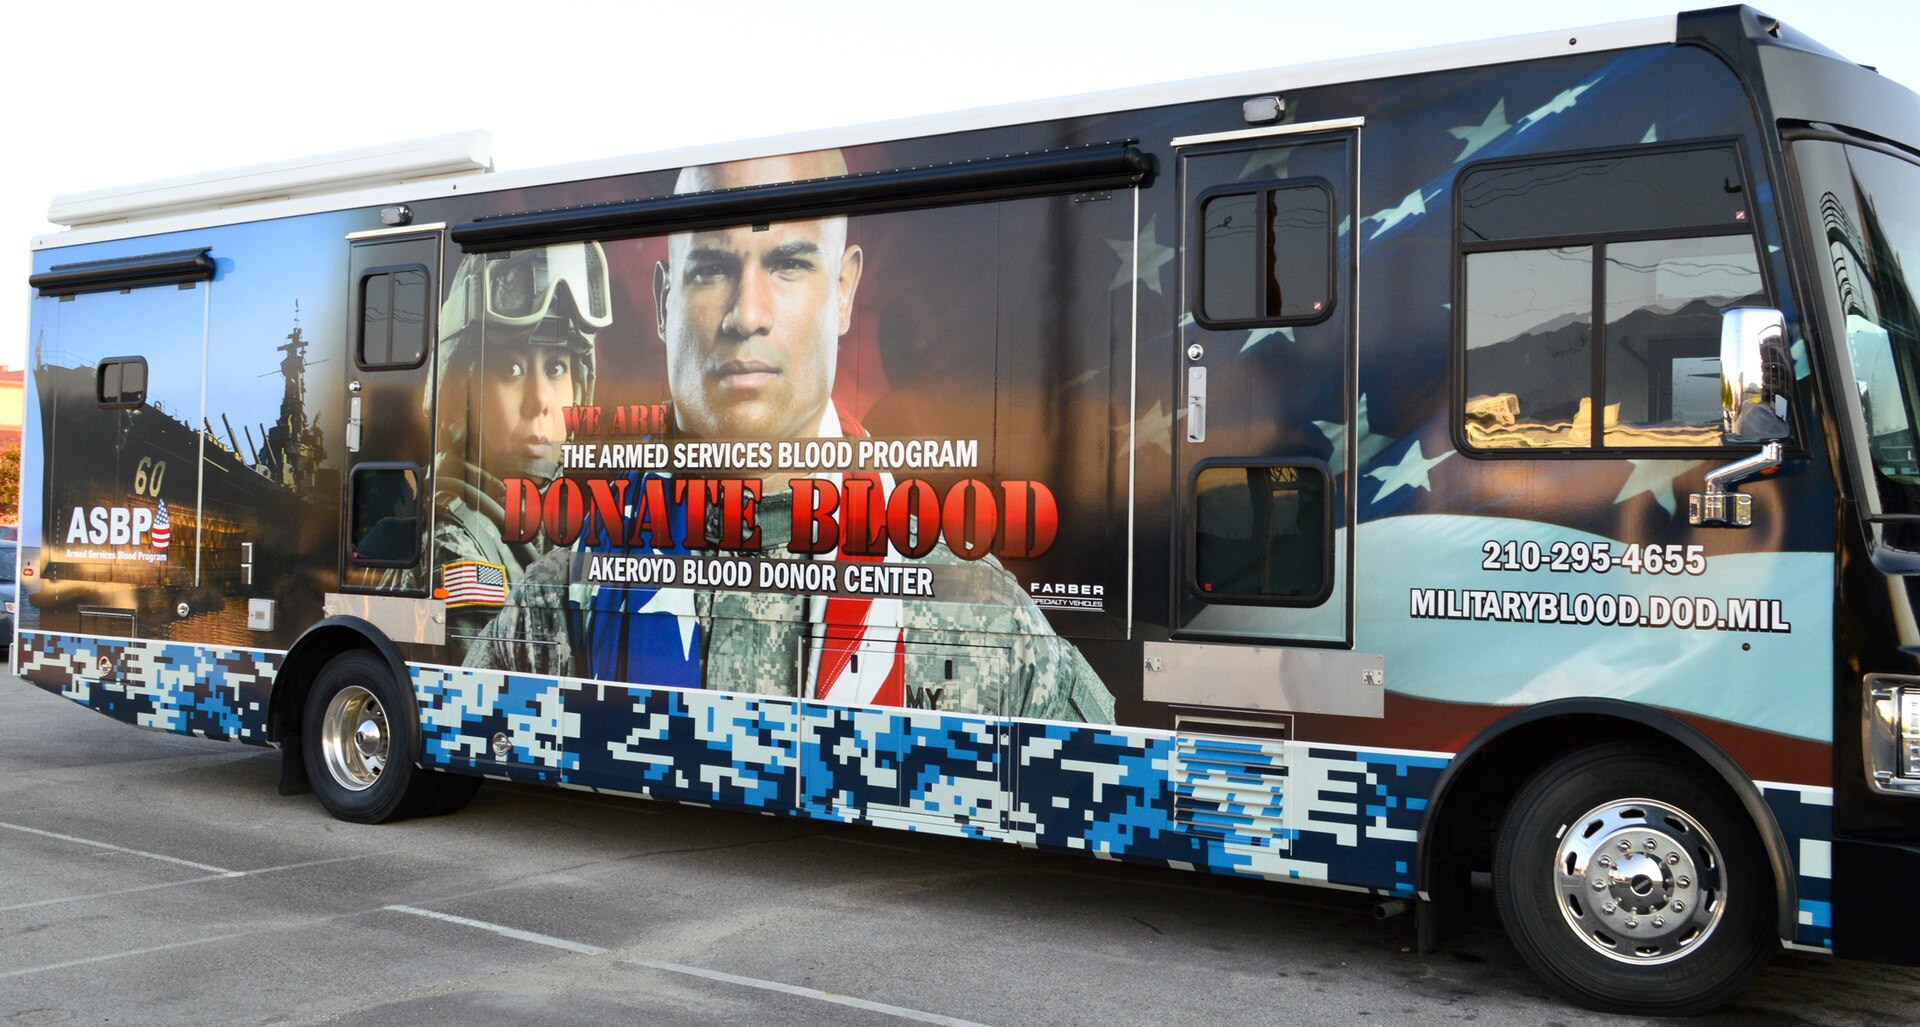 In September, the Akeroyd Blood Donor Center received a new blood mobile. The new state-of-the-art mobile will be used by the donor center to reach out to the Joint Base San Antonio-Fort Sam Houston permanent party population to collect plasma for the freeze-dried plasma program.